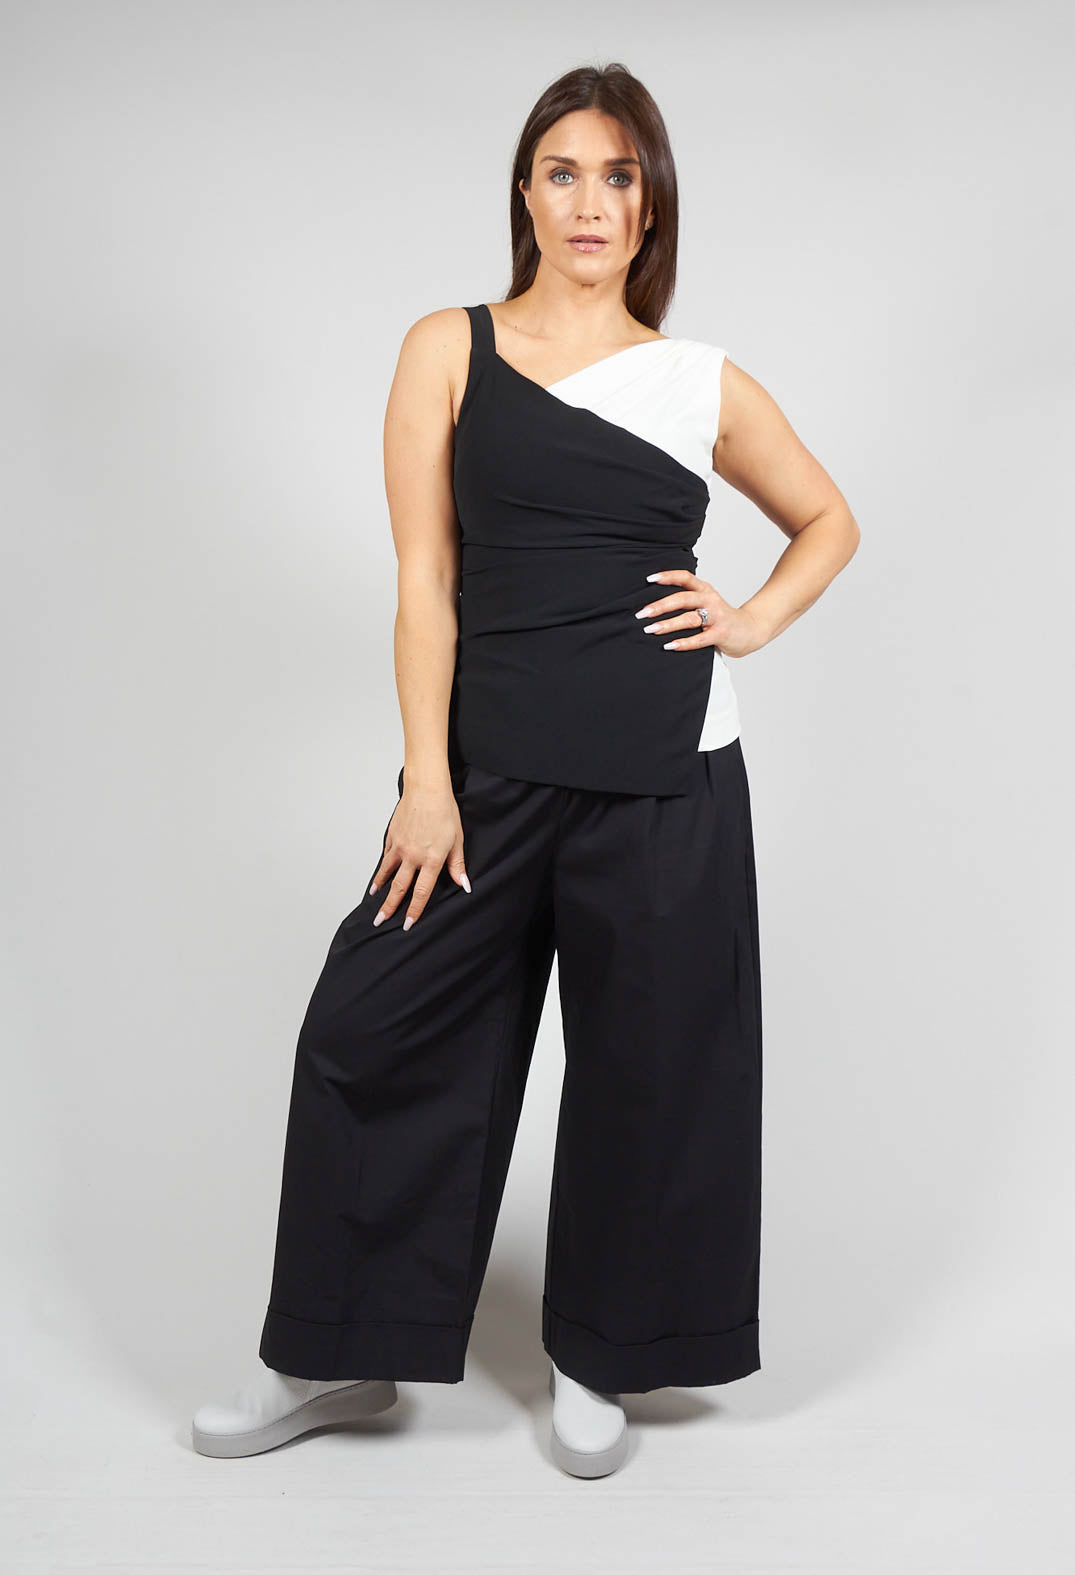 Ruched Sleeveless Top with Contrast Strap in Clesi Nero / Clesi Latte